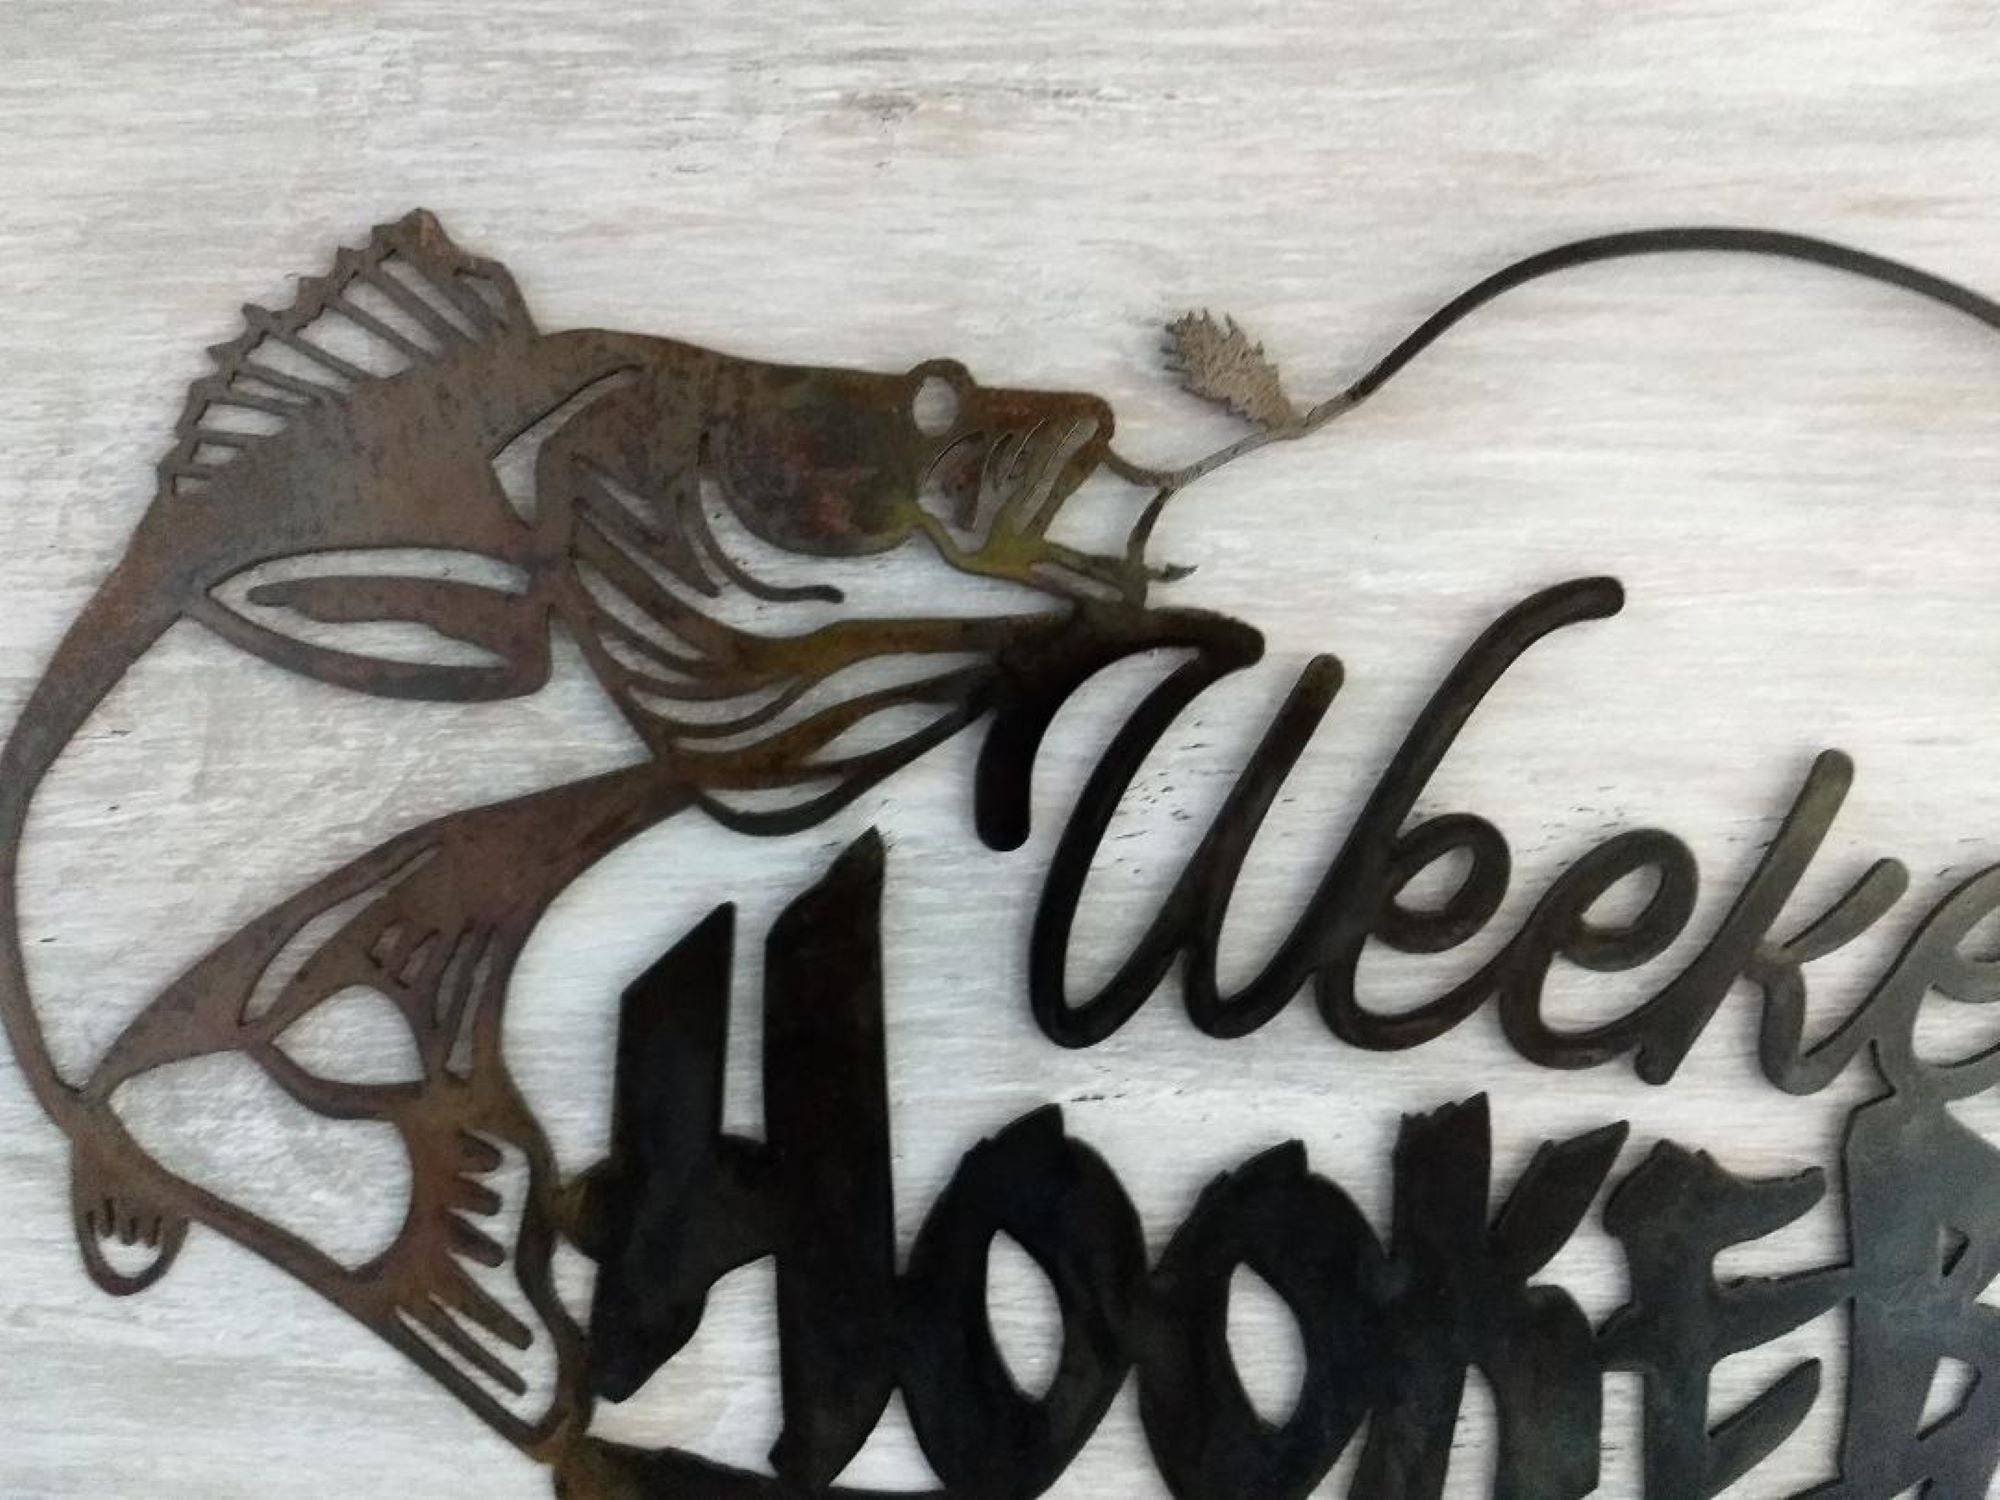 Humorous Metal Fishing Sign, Weekend Hooker Sign, Gift for Fisherman, Funny  Fishing Sign, Man Cave Decor